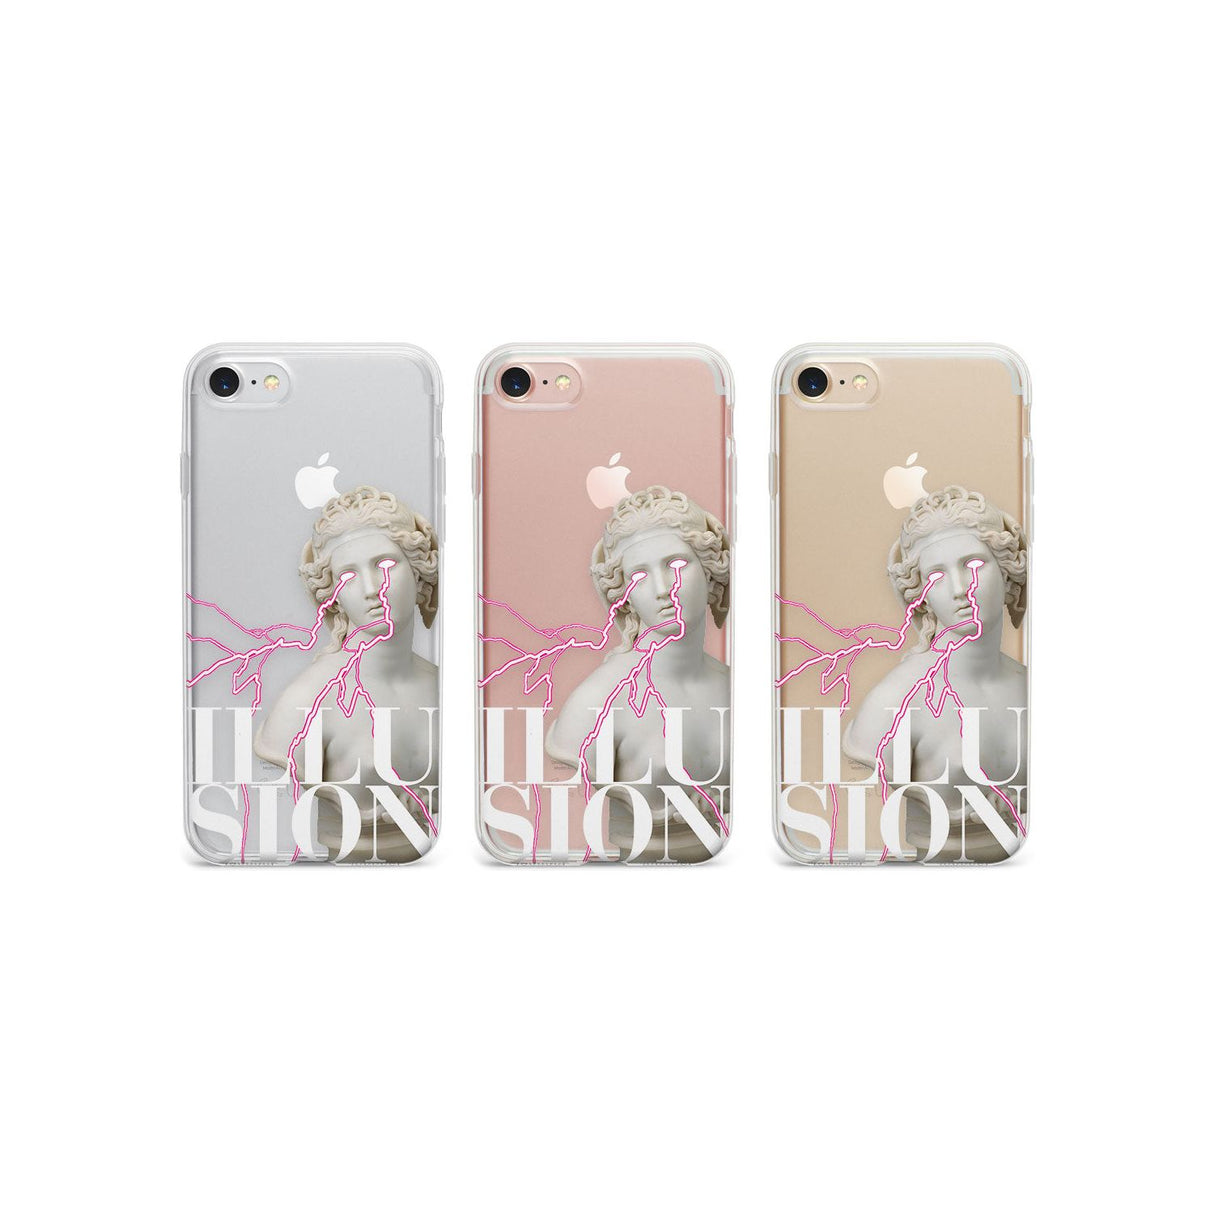 ANGELS Phone Case for iPhone SE